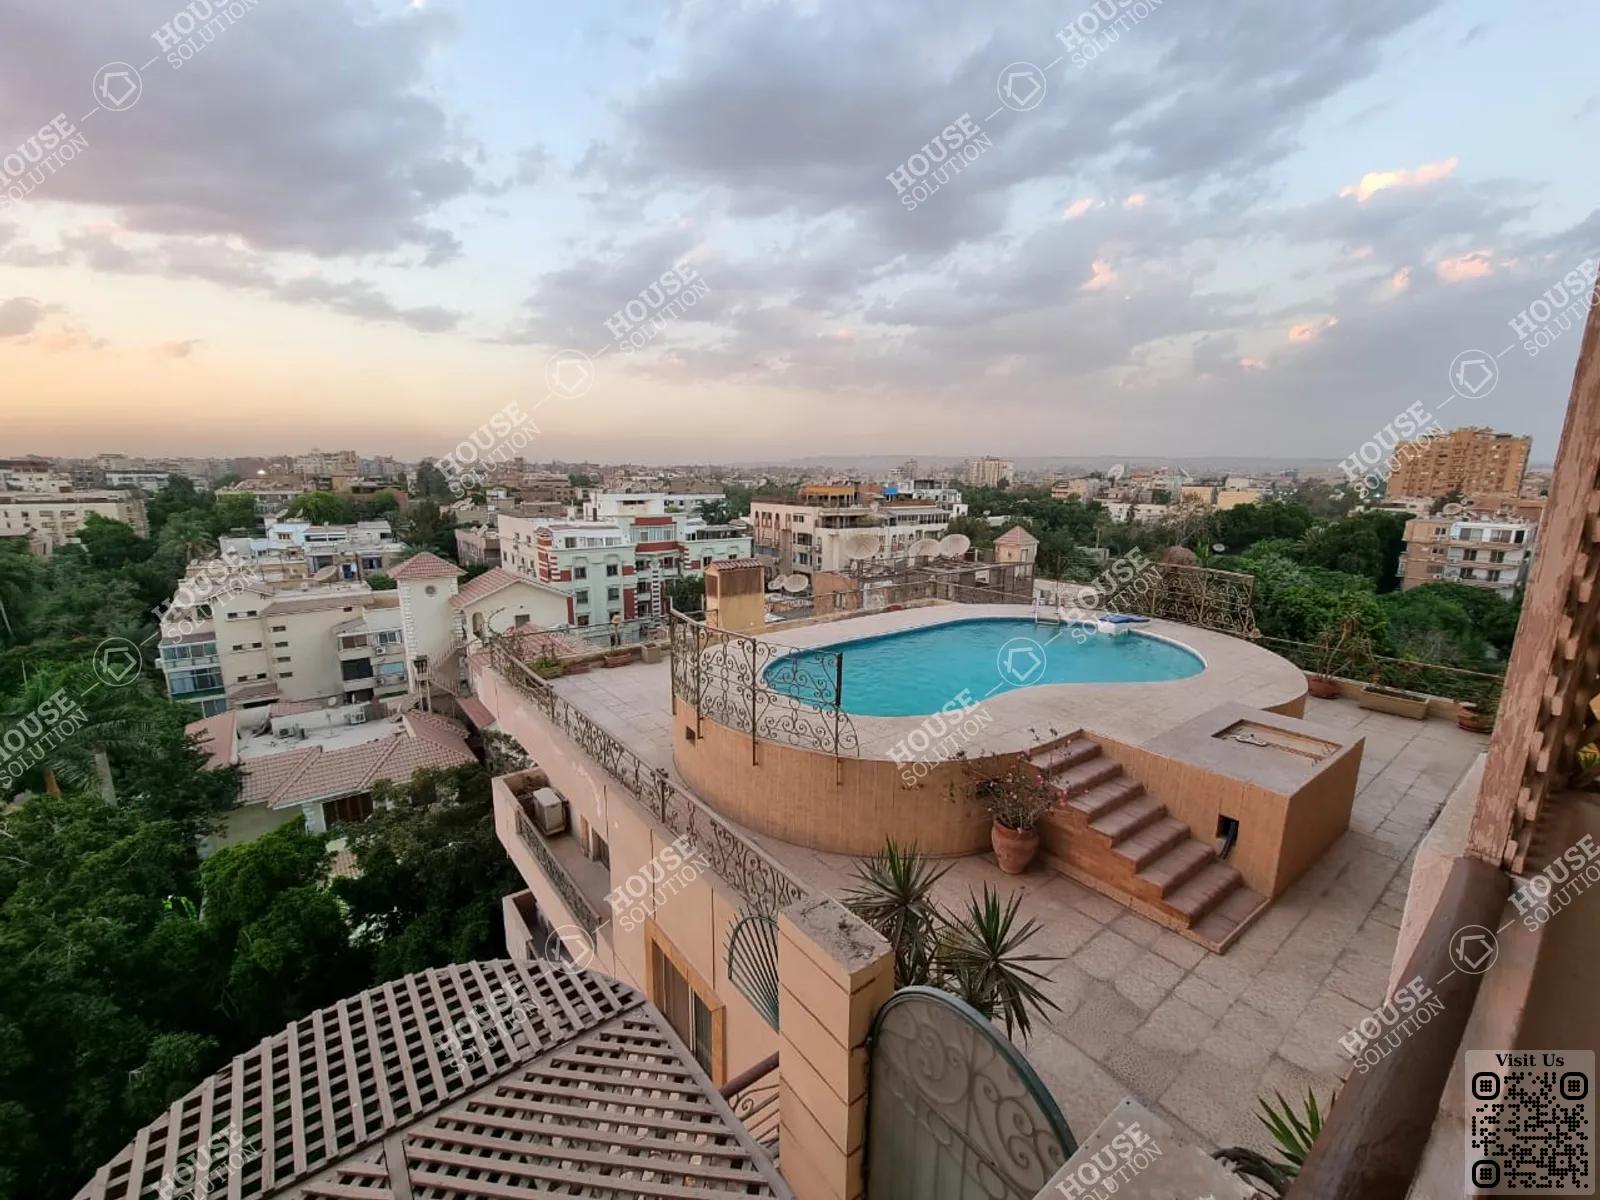 SHARED SWIMMING POOL  @ Apartments For Sale In Maadi Maadi Sarayat Area: 200 m² consists of 4 Bedrooms 2 Bathrooms Furnished 5 stars #5260-1